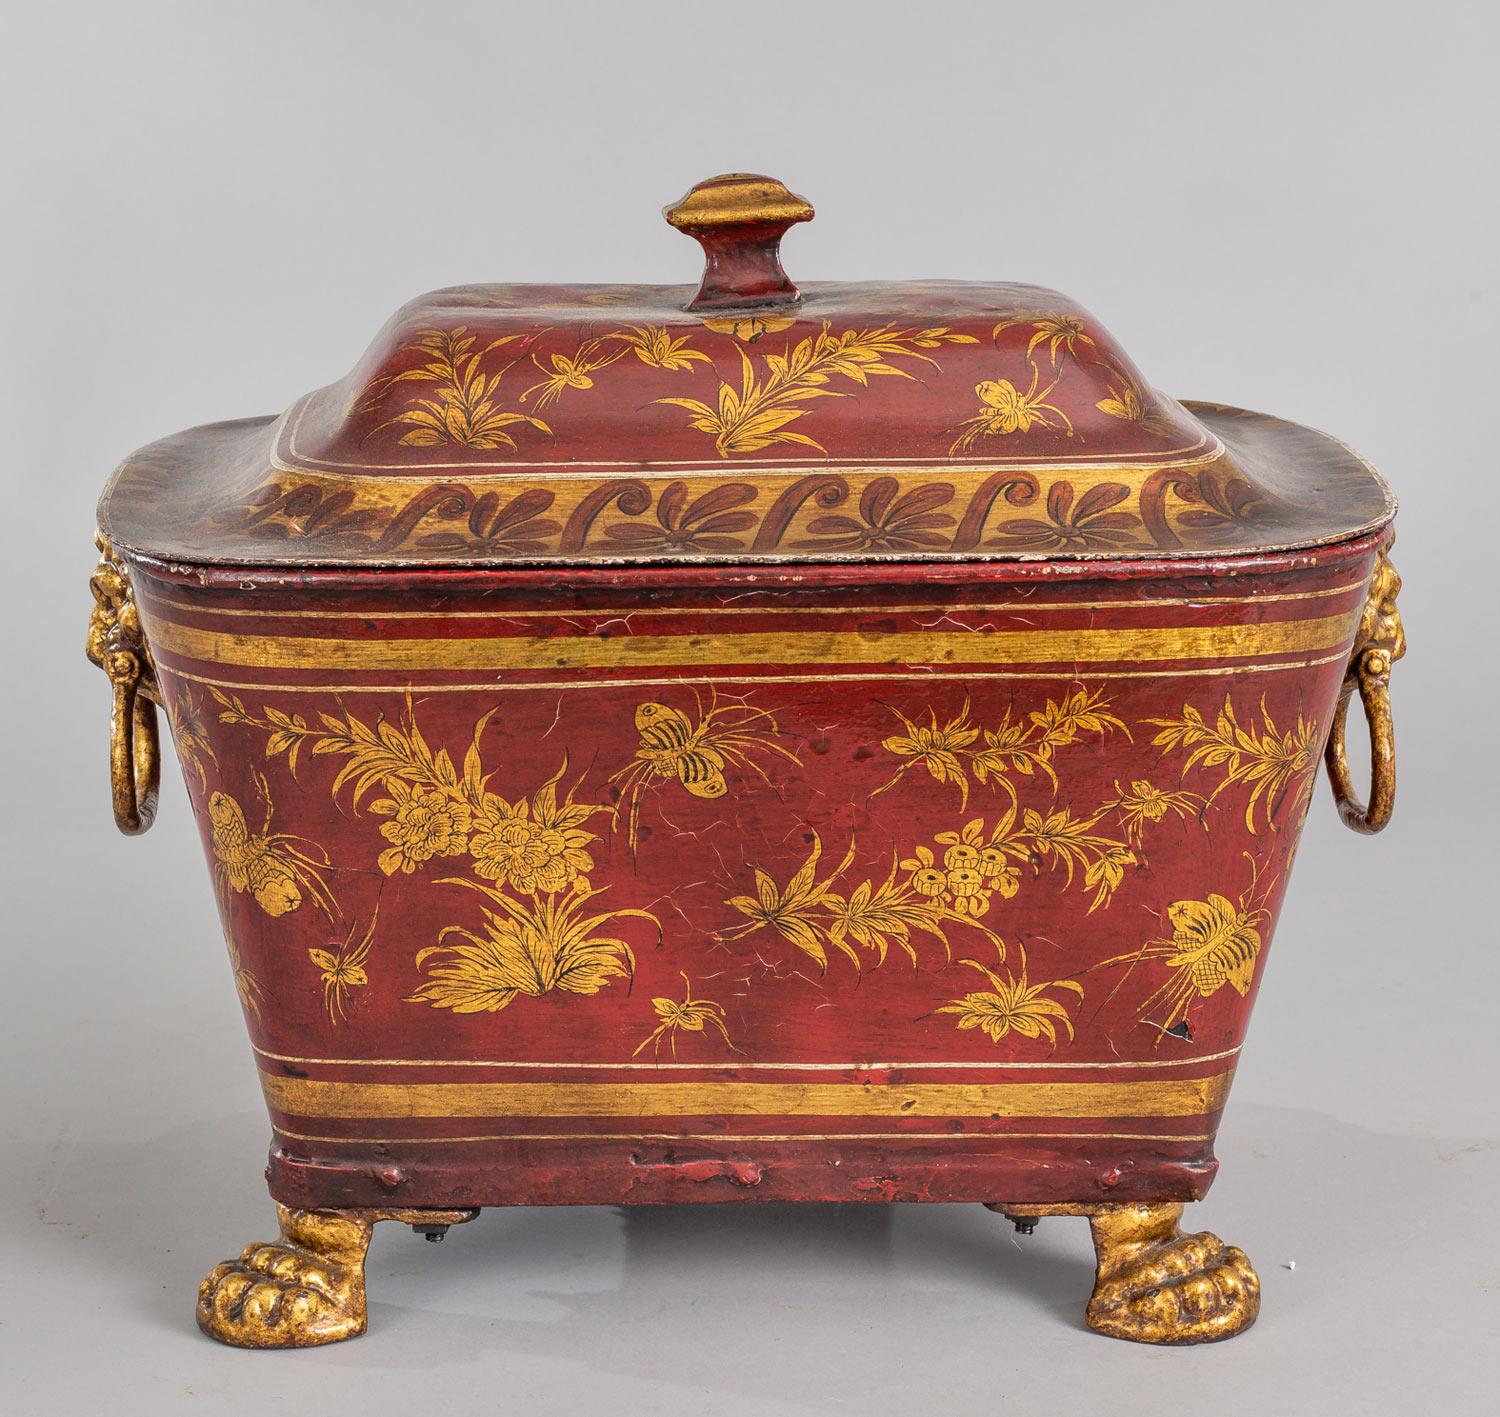 Early Victorian rectangular lacquered tole coal bucket with lion’s mask and ring handles, the body and lid decorated with gilded foliage, butterflies and insects on an iron red background, mounted on gilded lion’s paw feet.